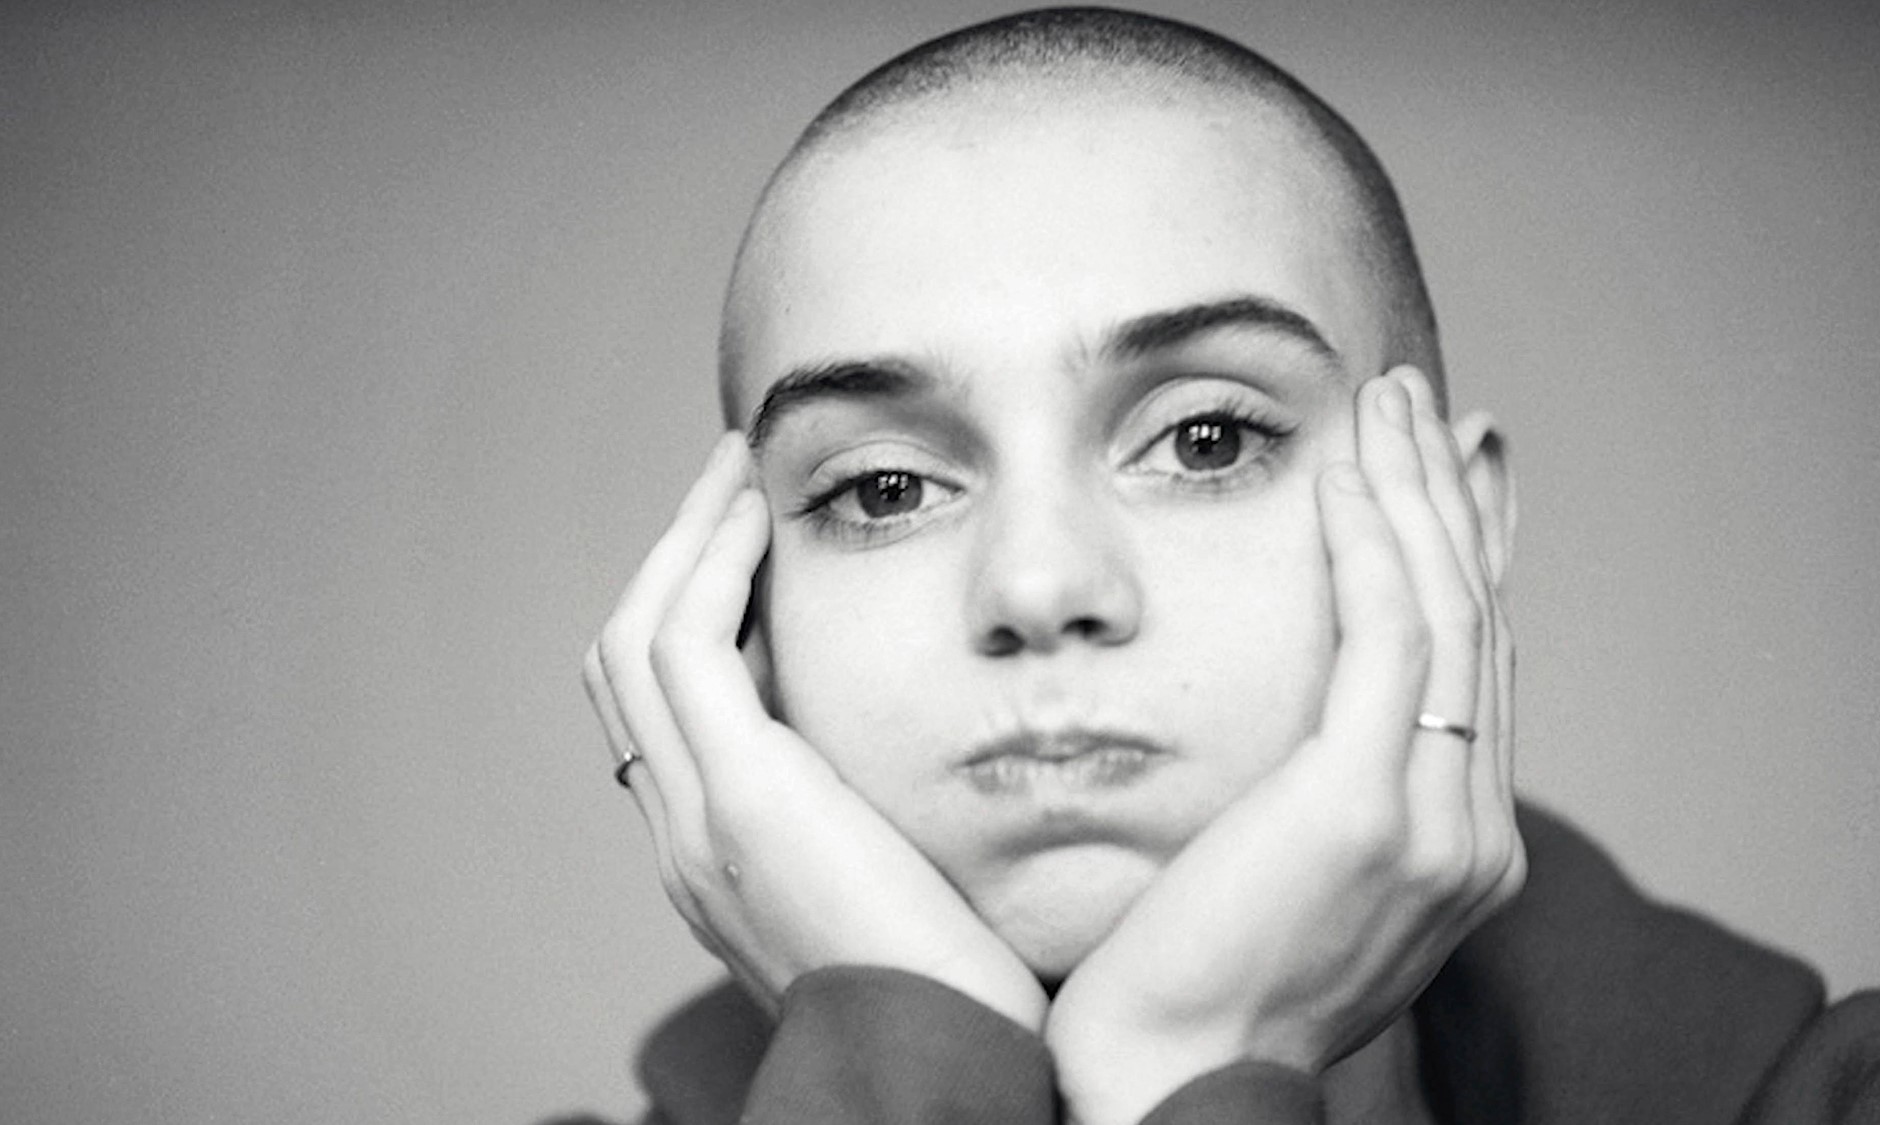 Sinéad O'Connor showing us her character